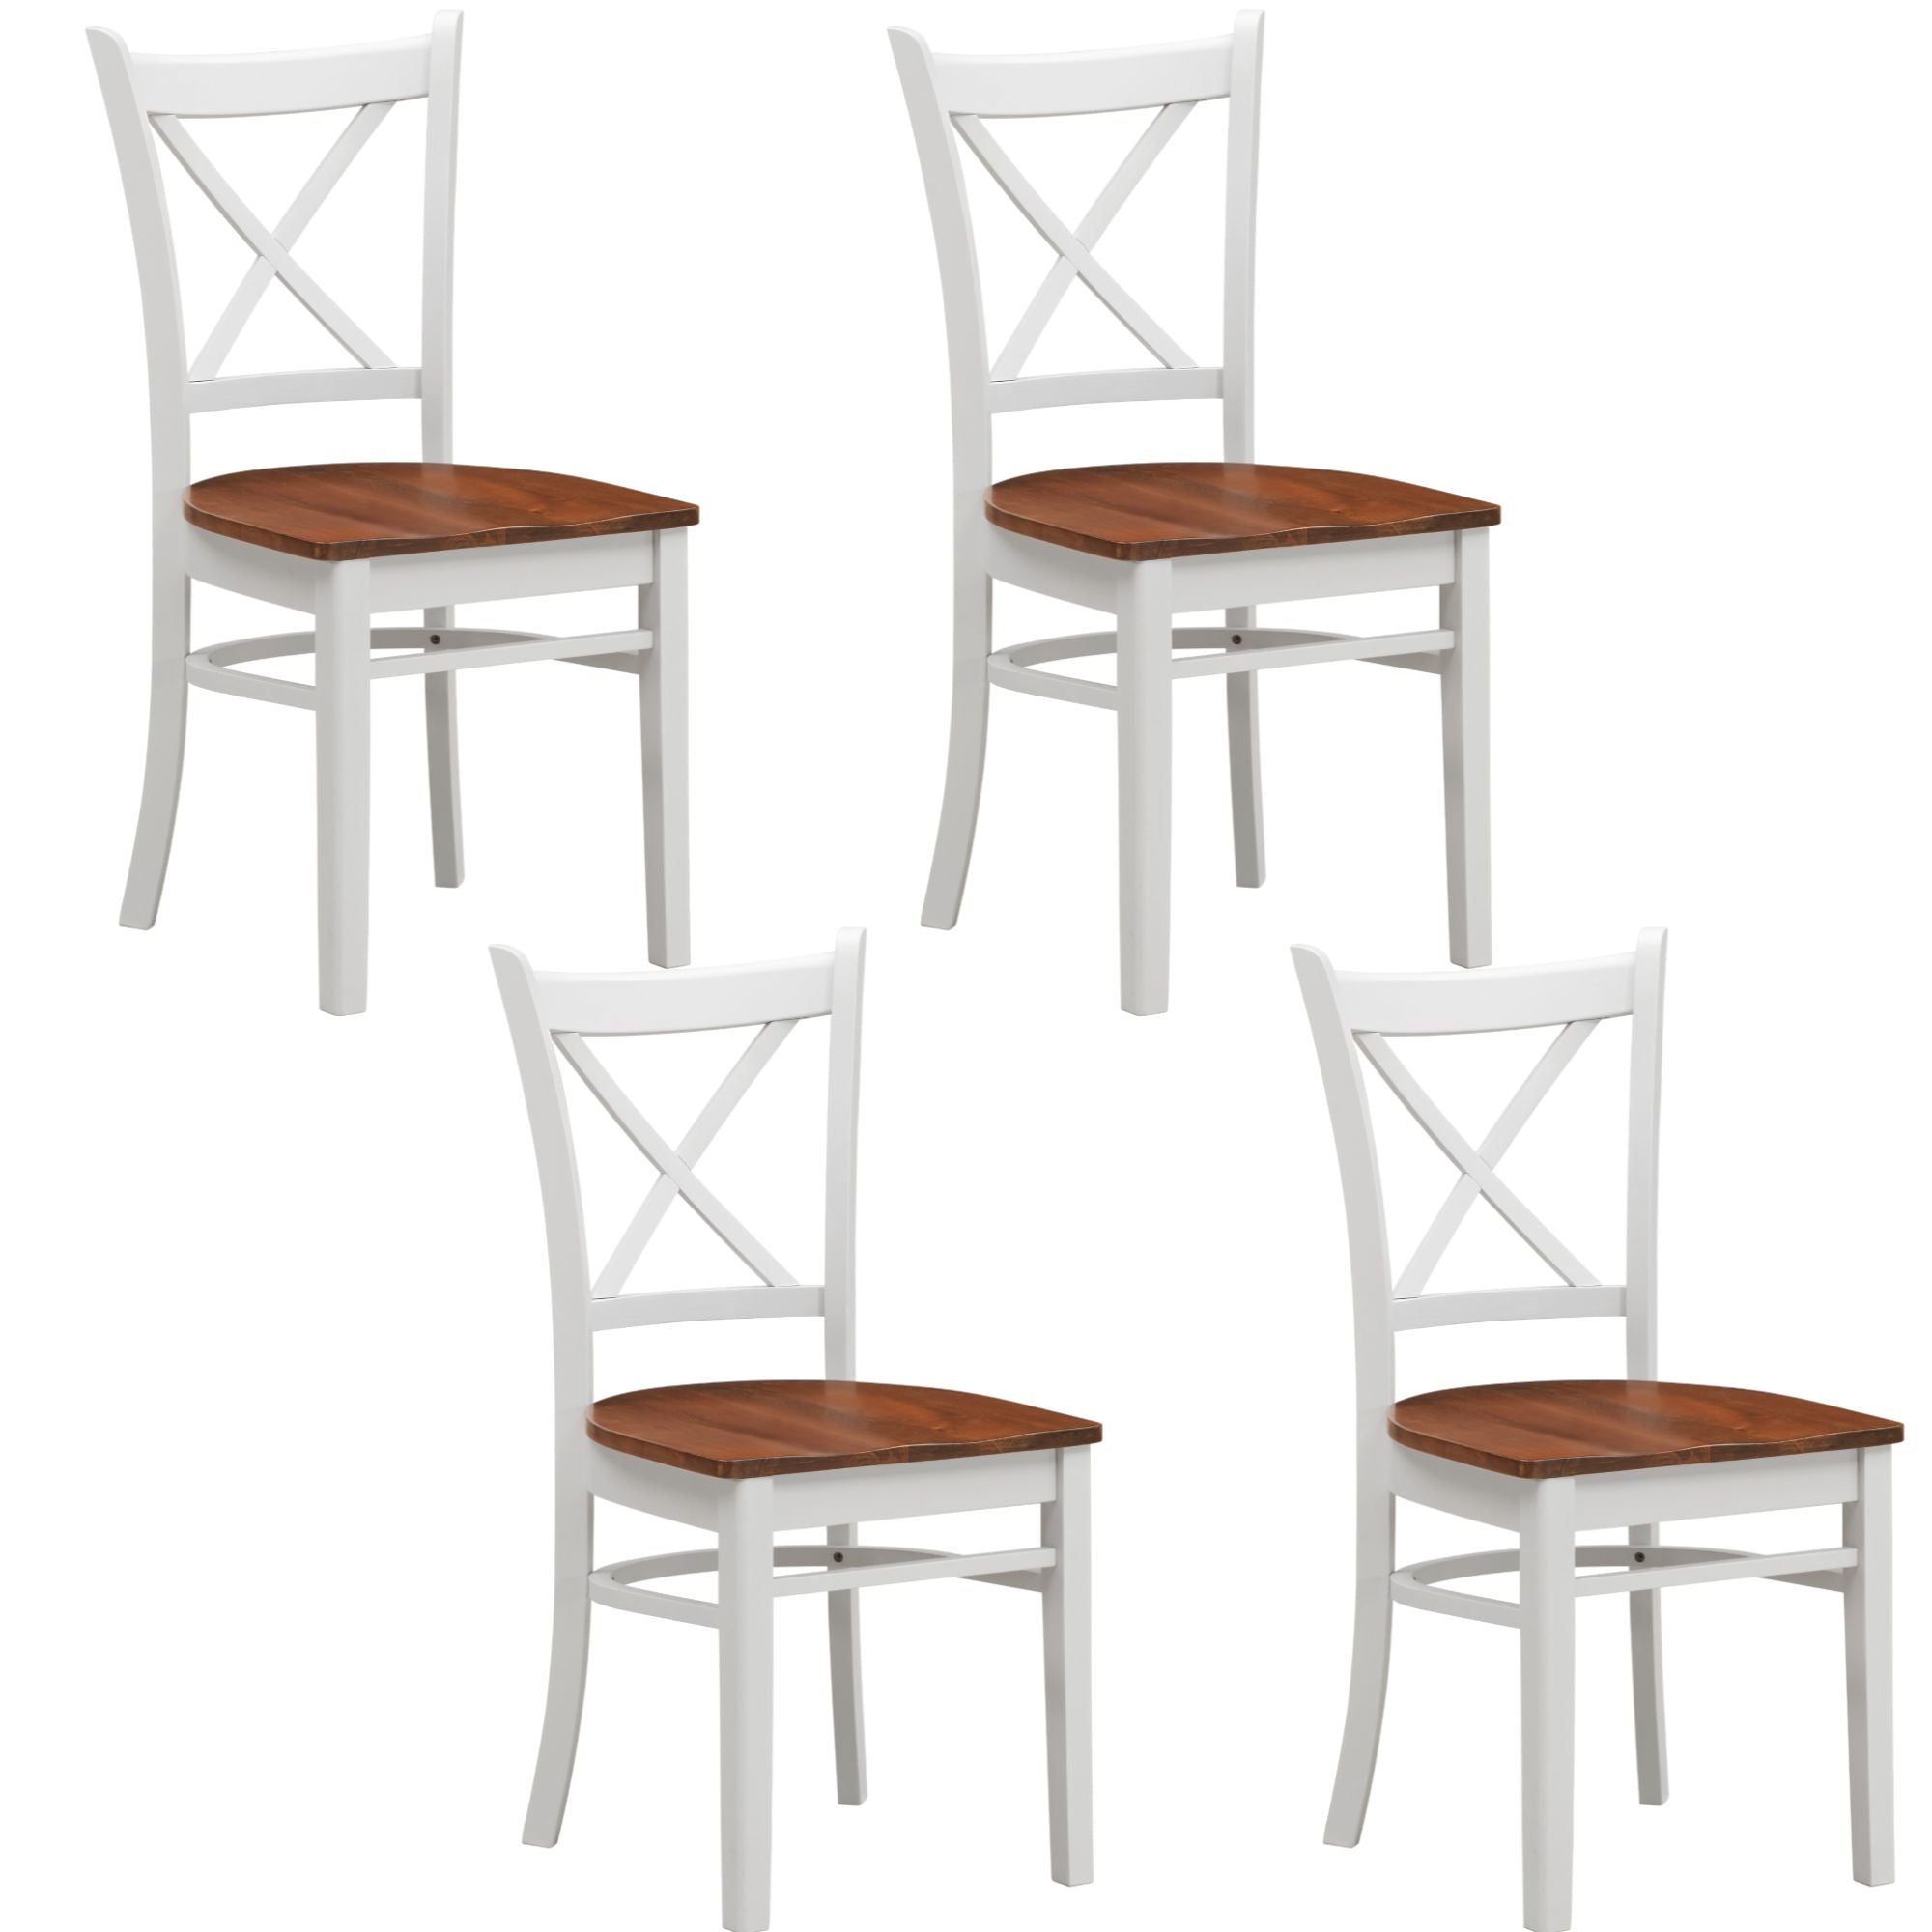 4 pcs Classic Crossback Dining Chair Set - Solid Rubber Wood - White Oak Finish